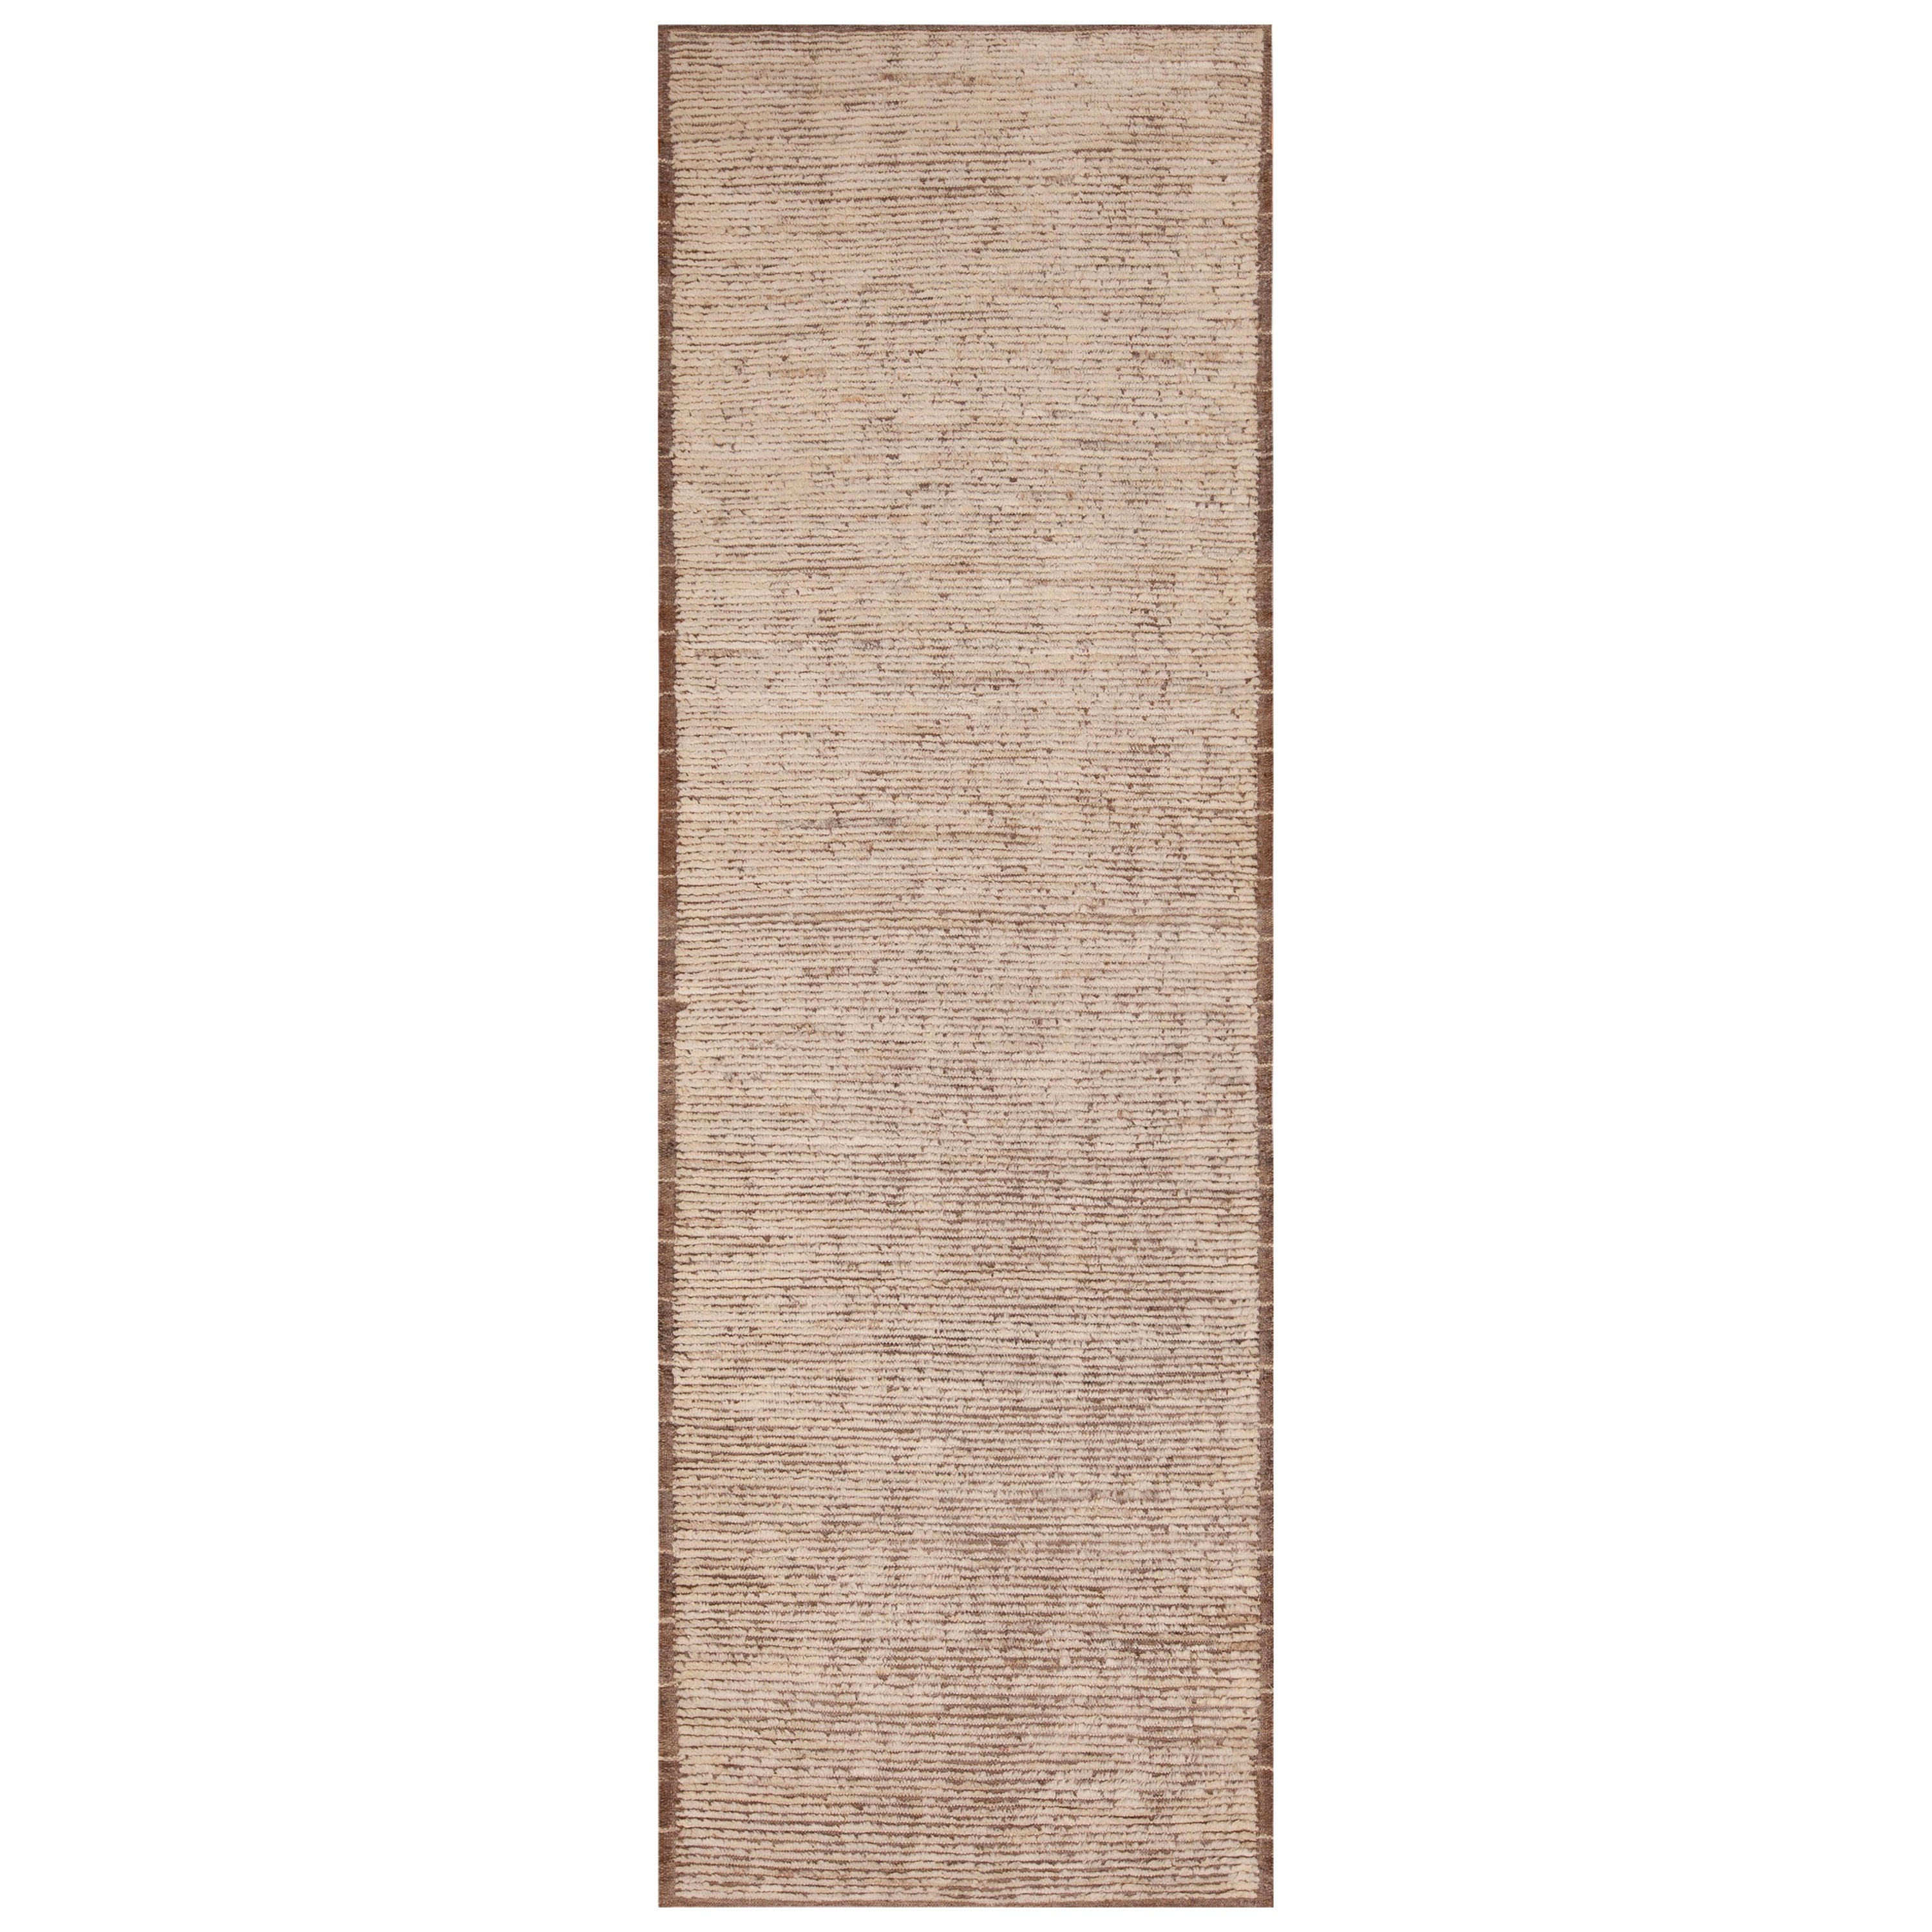 Nazmiyal Collection Solid Abstract Ivory Modern Hallway Runner Rug 3'2" x 9'9"